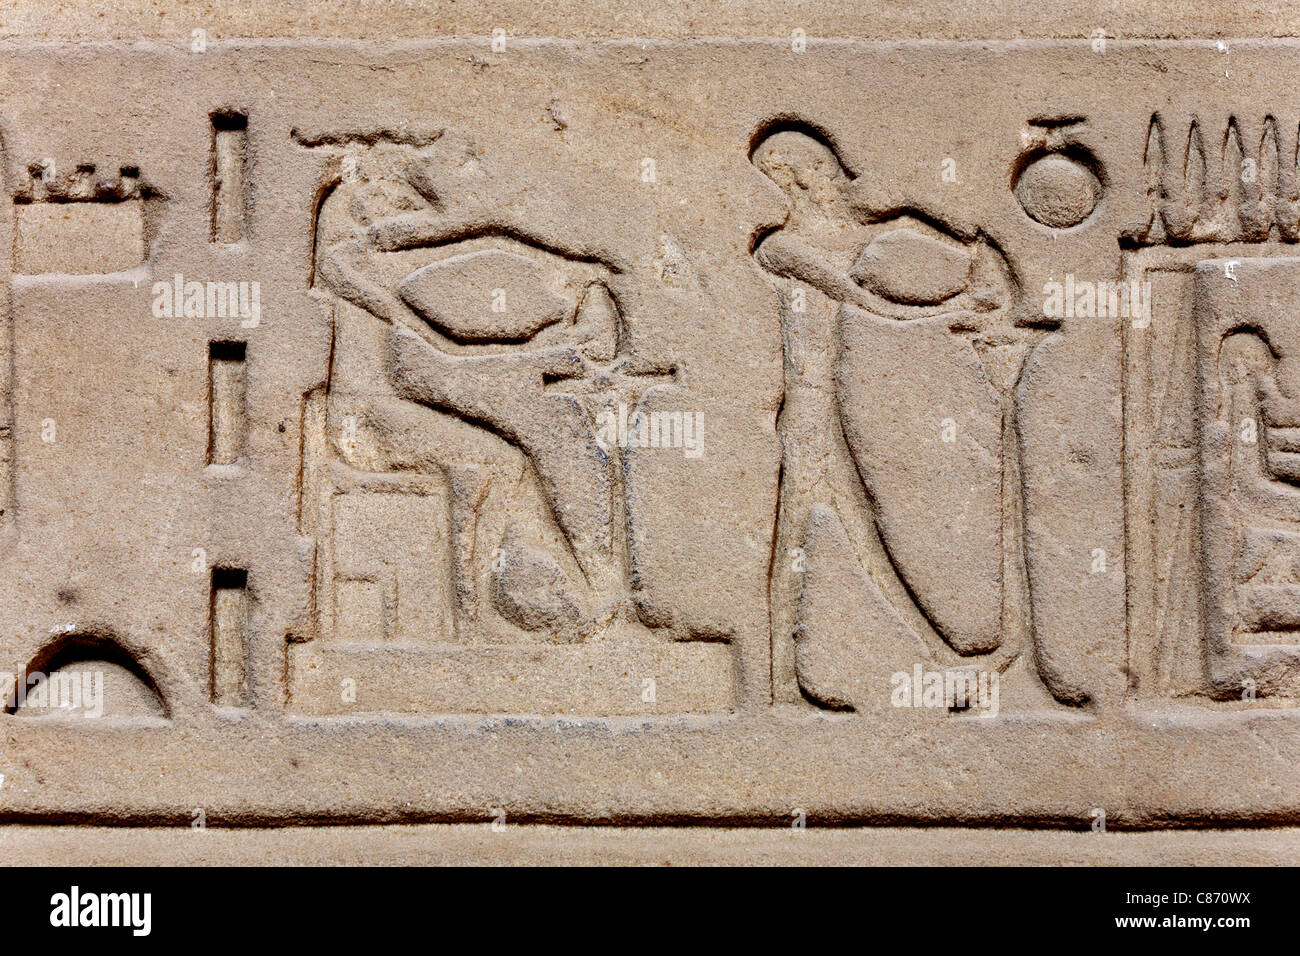 Relief of Khnum at potters wheel within the Hypostyle Hall at the Ptolemaic Roman Temple Of Khnum at Esna, Egypt Stock Photo